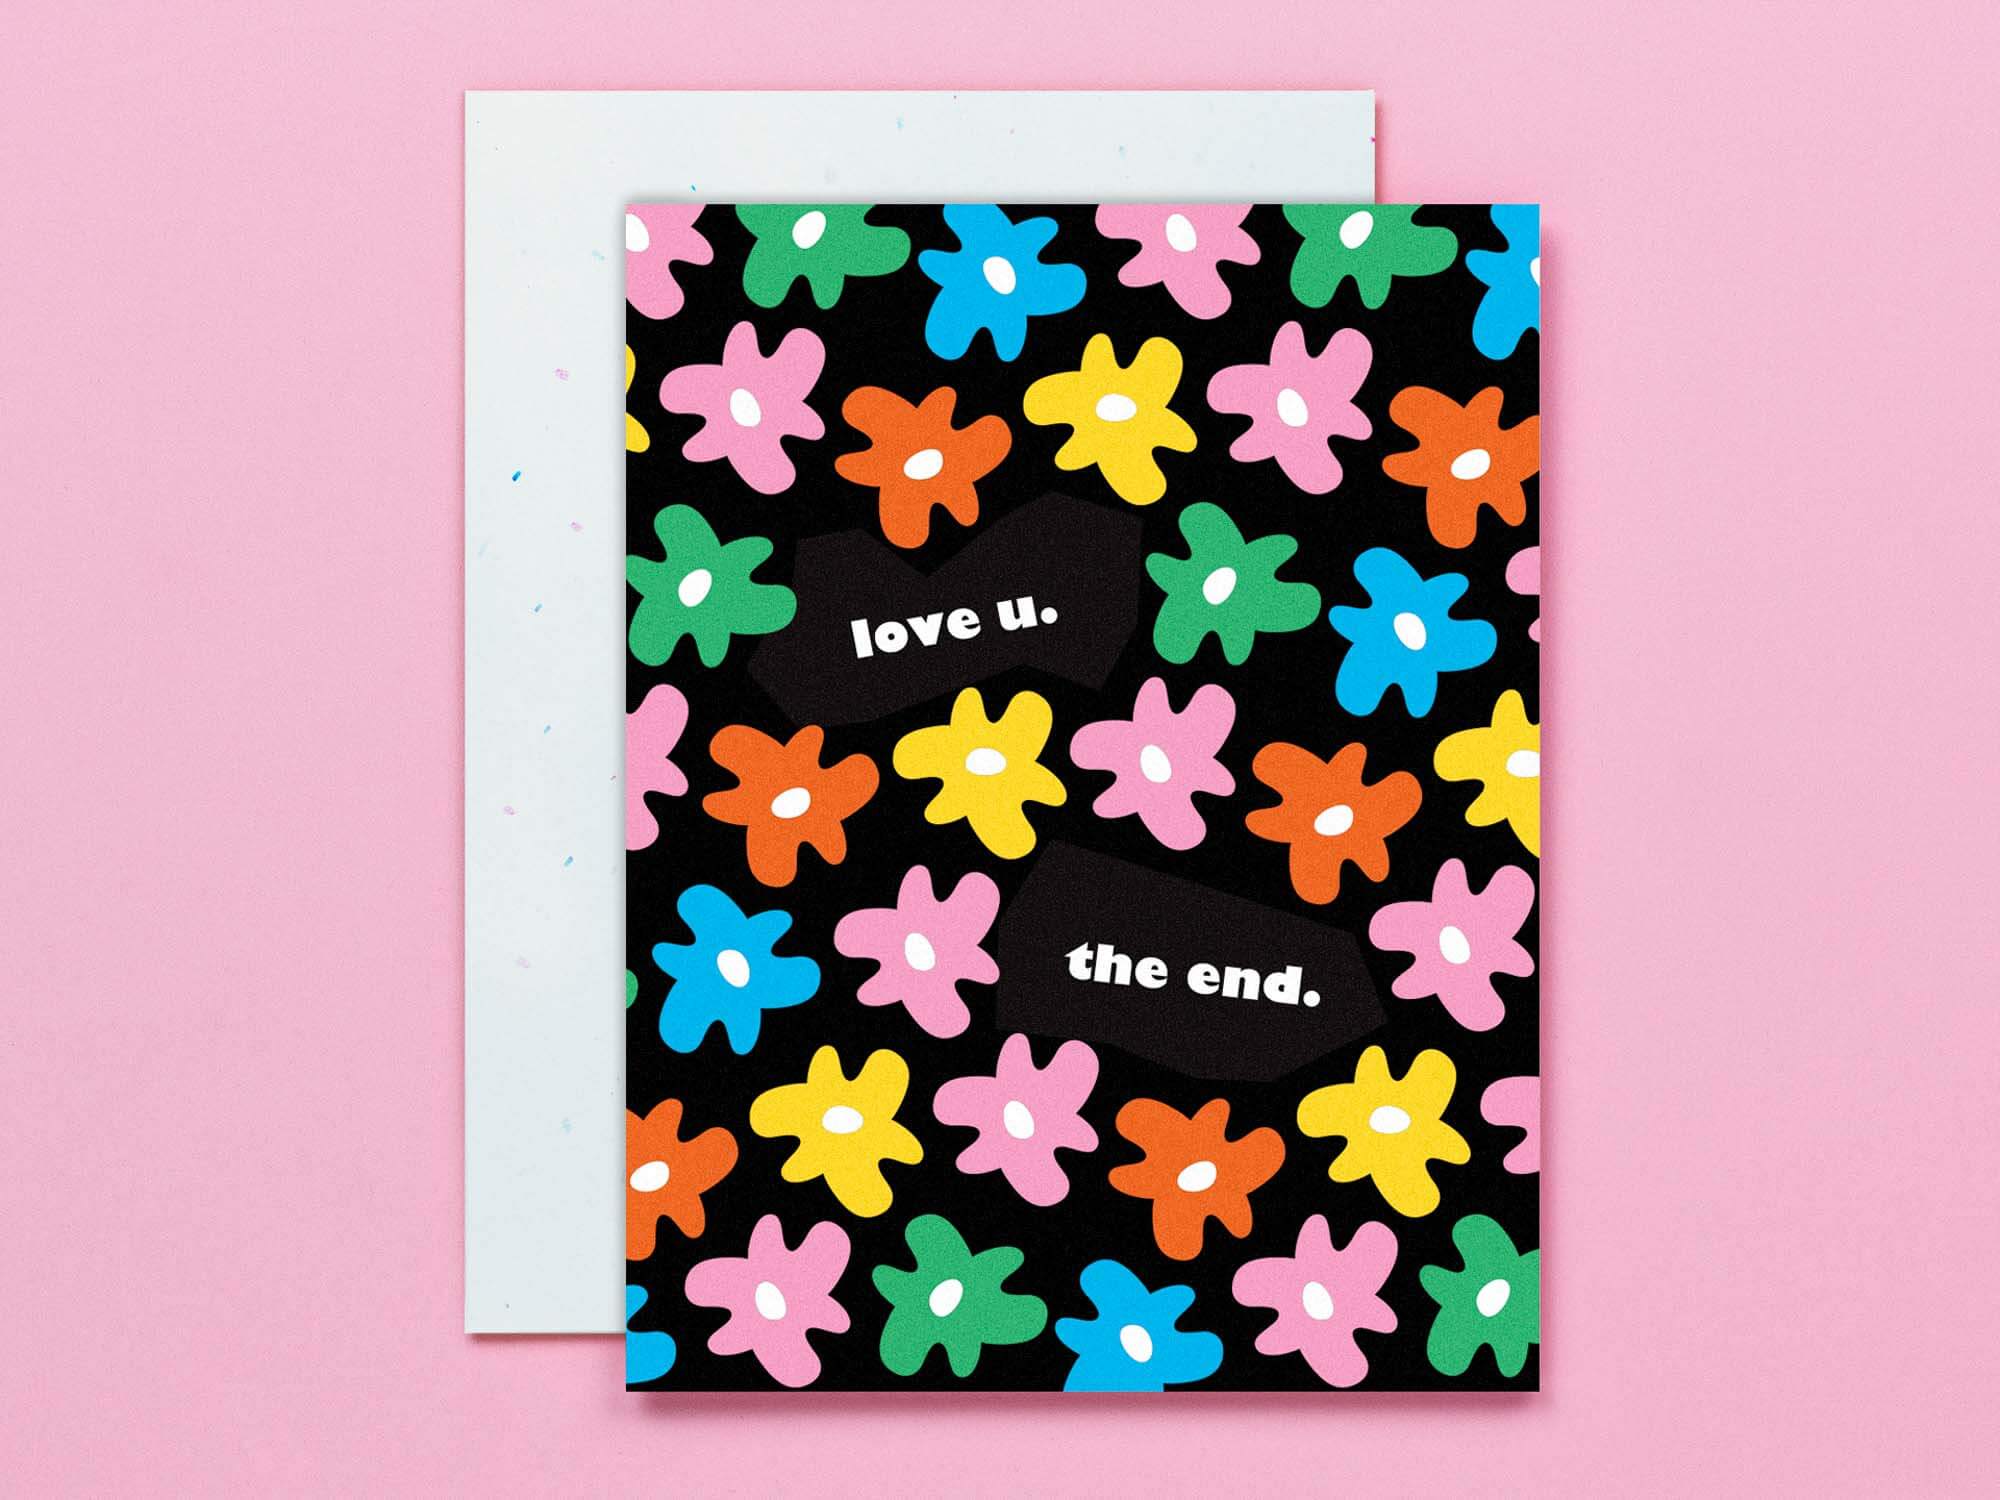 Fairy Tale Ending "Love u. The end." Modern abstract colorful flower pattern love, anniversary, or Valentine's Day card. Made in USA by My Darlin' @mydarlin_bk